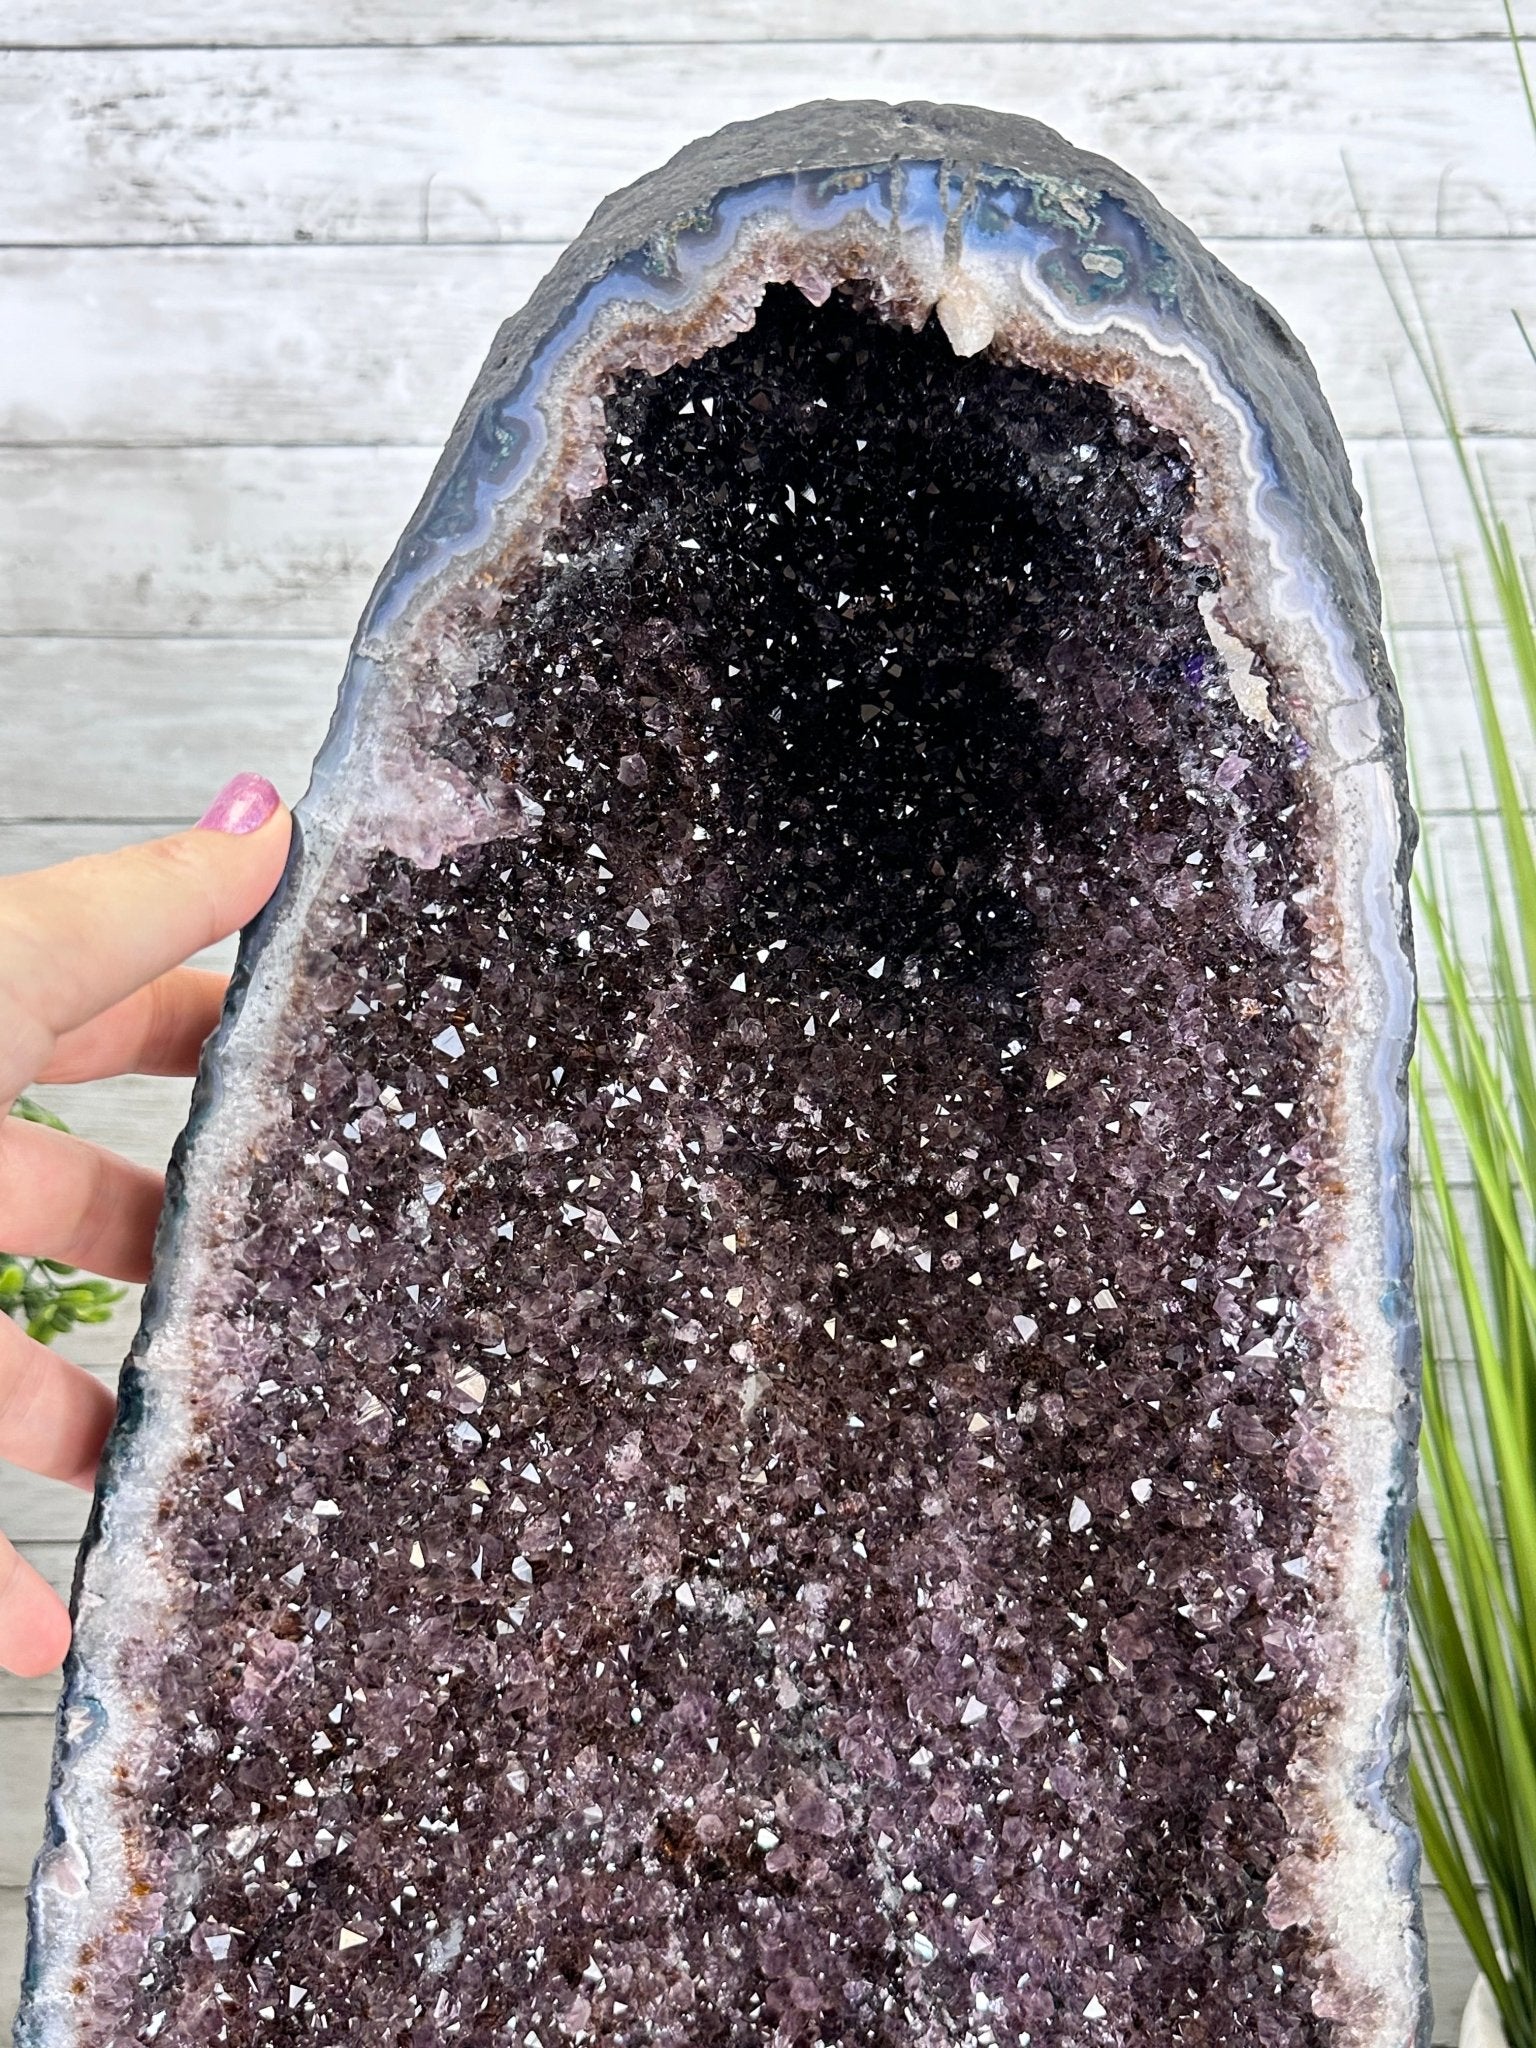 Extra Quality Amethyst Cathedral, 177 lbs & 37" Tall #5601-1274 - Brazil GemsBrazil GemsExtra Quality Amethyst Cathedral, 177 lbs & 37" Tall #5601-1274Cathedrals5601-1274